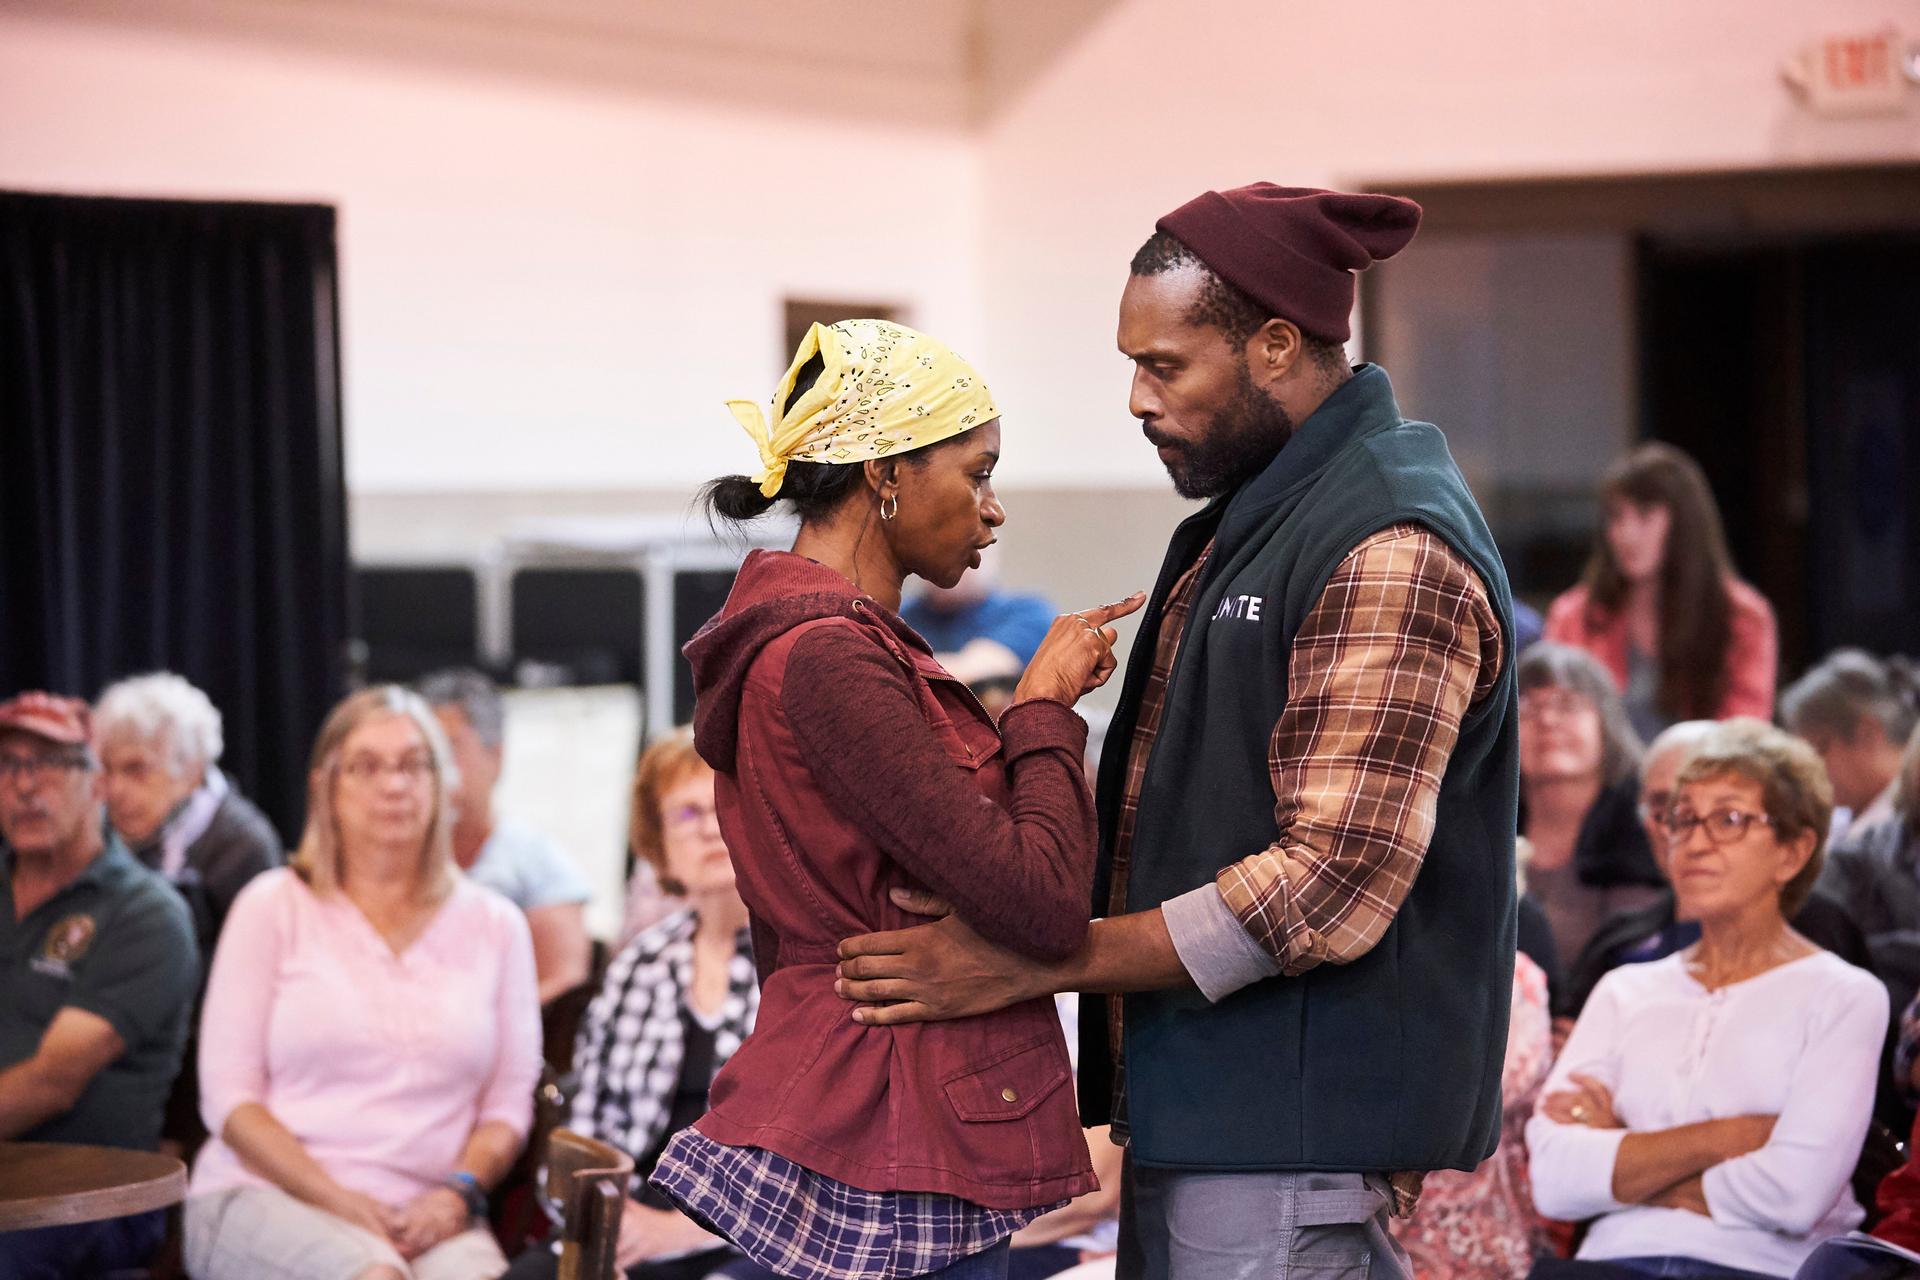 Jenny Jules and Benton Greene in the Mobile Unit National Tour of “Sweat,” written by Lynn Nottage and directed by Kate Whoriskey, in Ravenna, OH during a free tour to 18 cities in the Midwest.